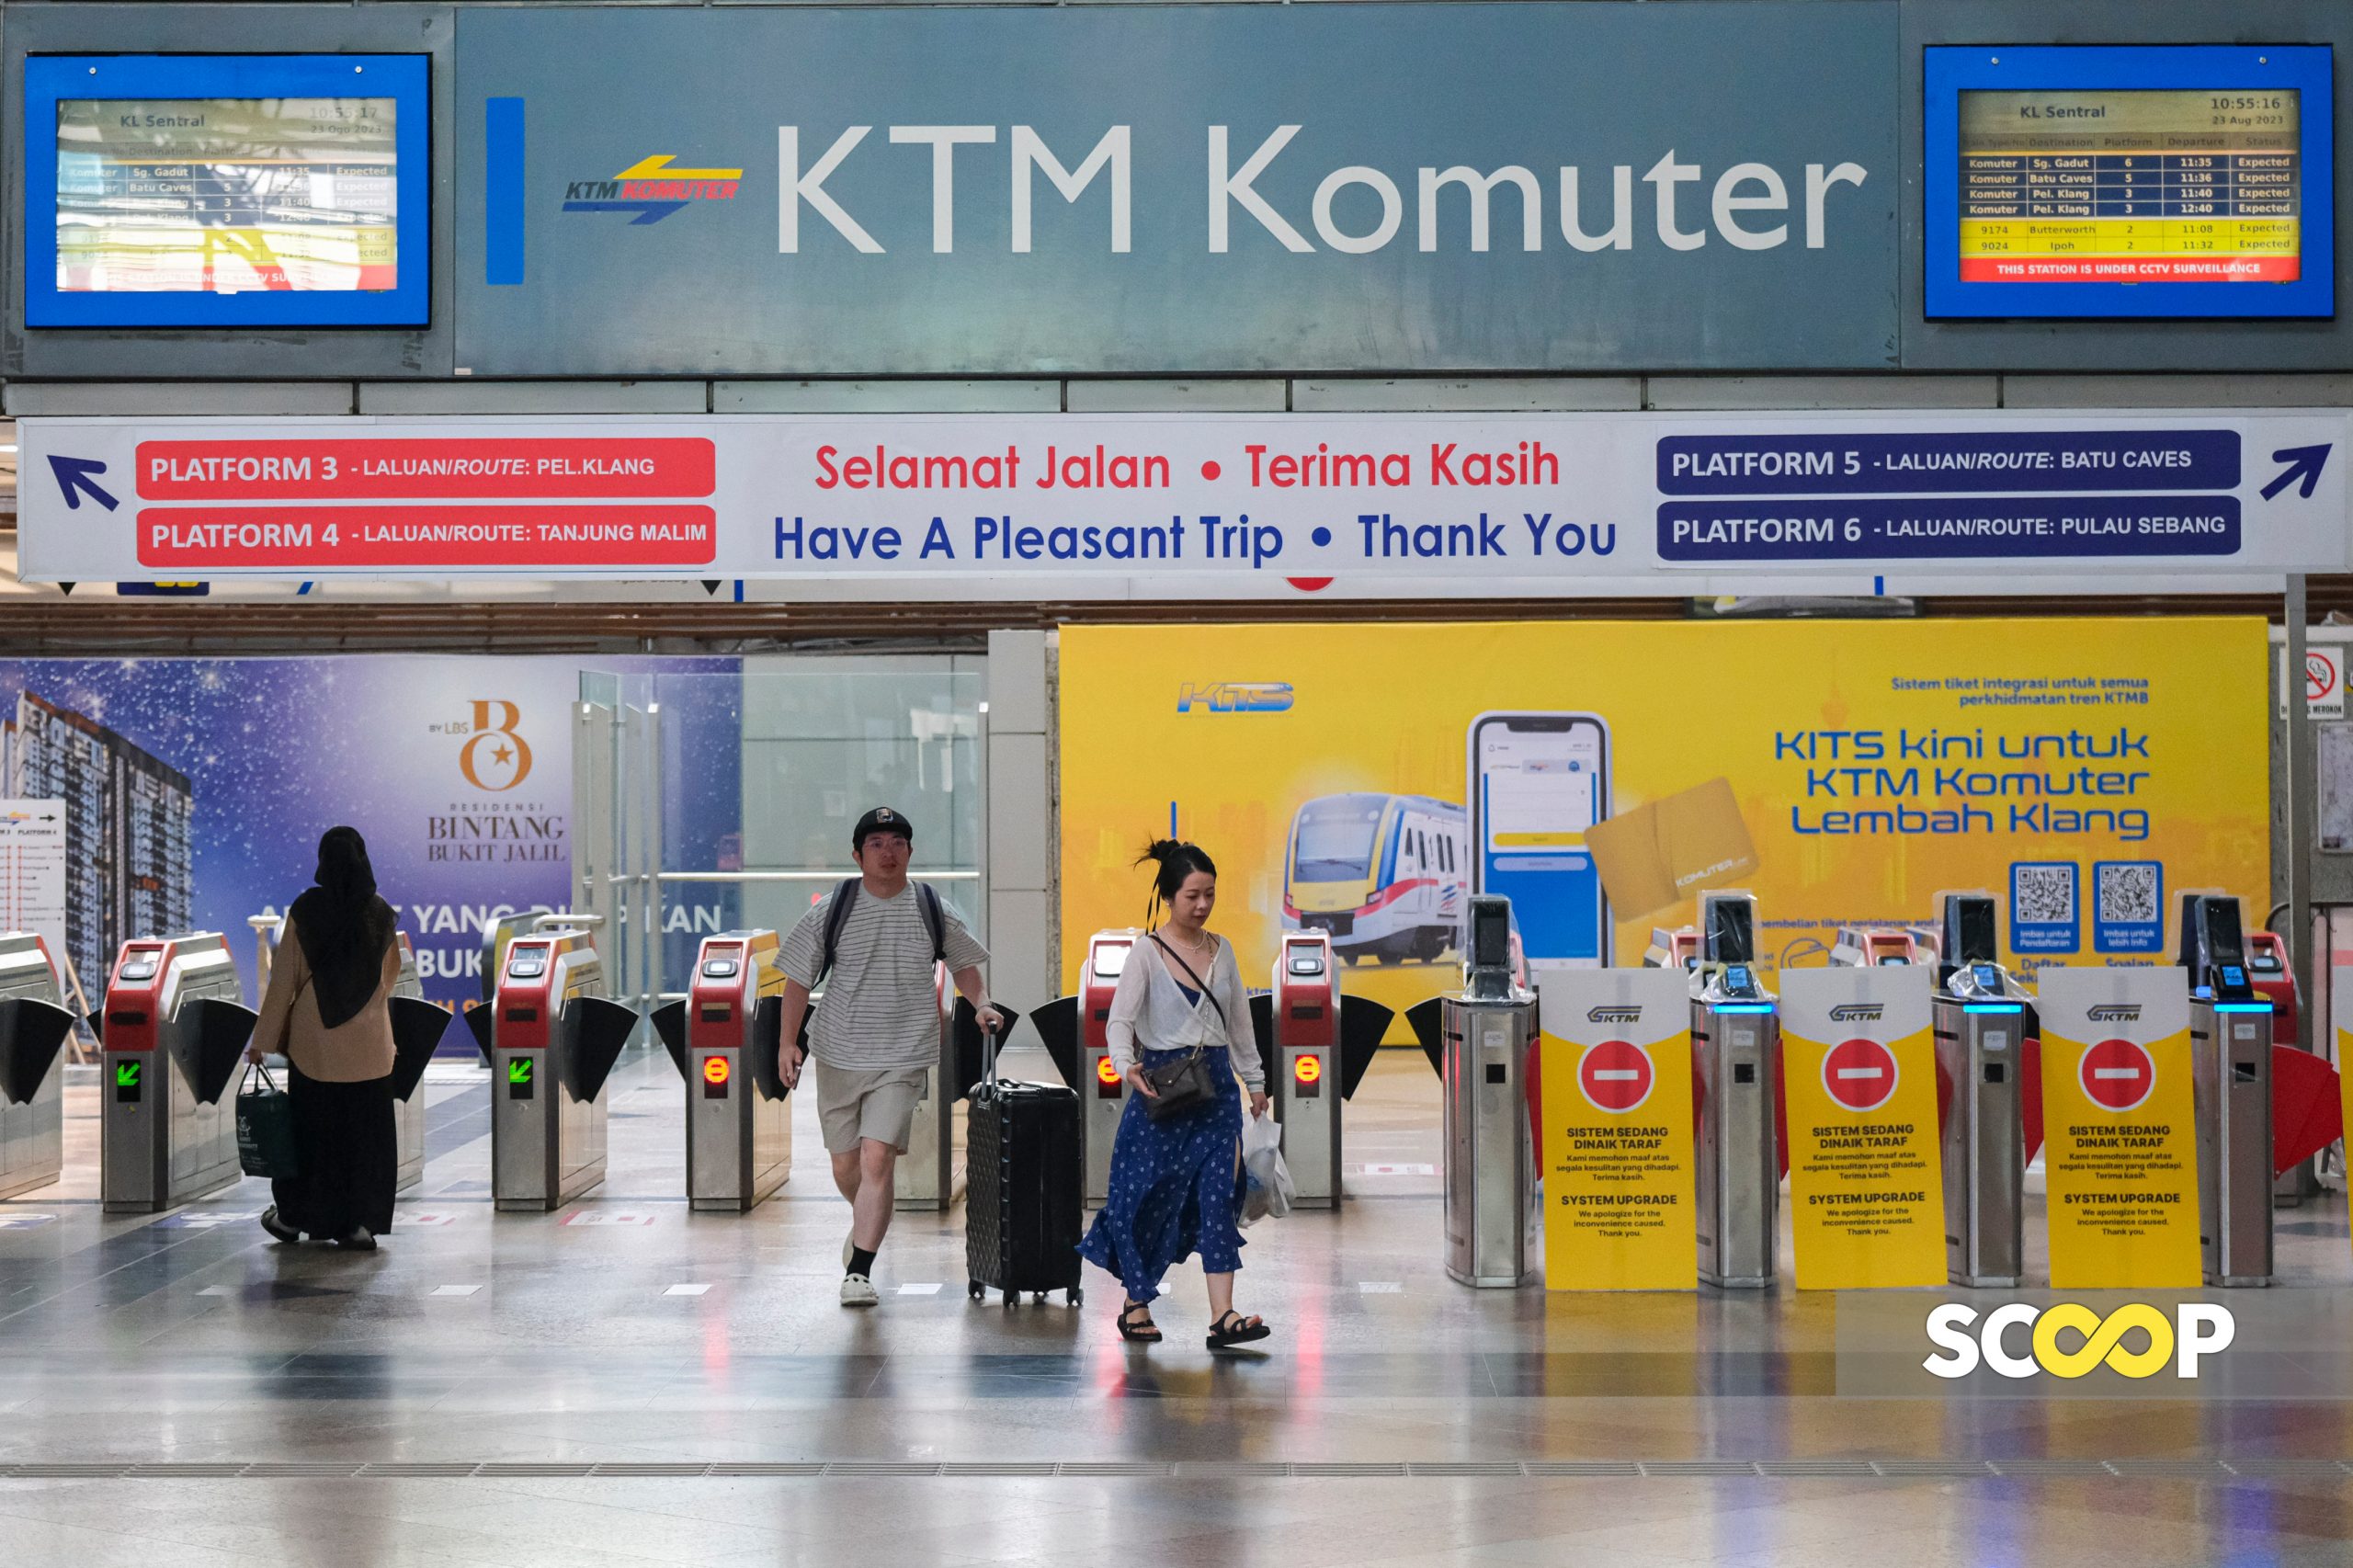 Upgrading works for systems, infrastructure behind Komuter delays: KTMB